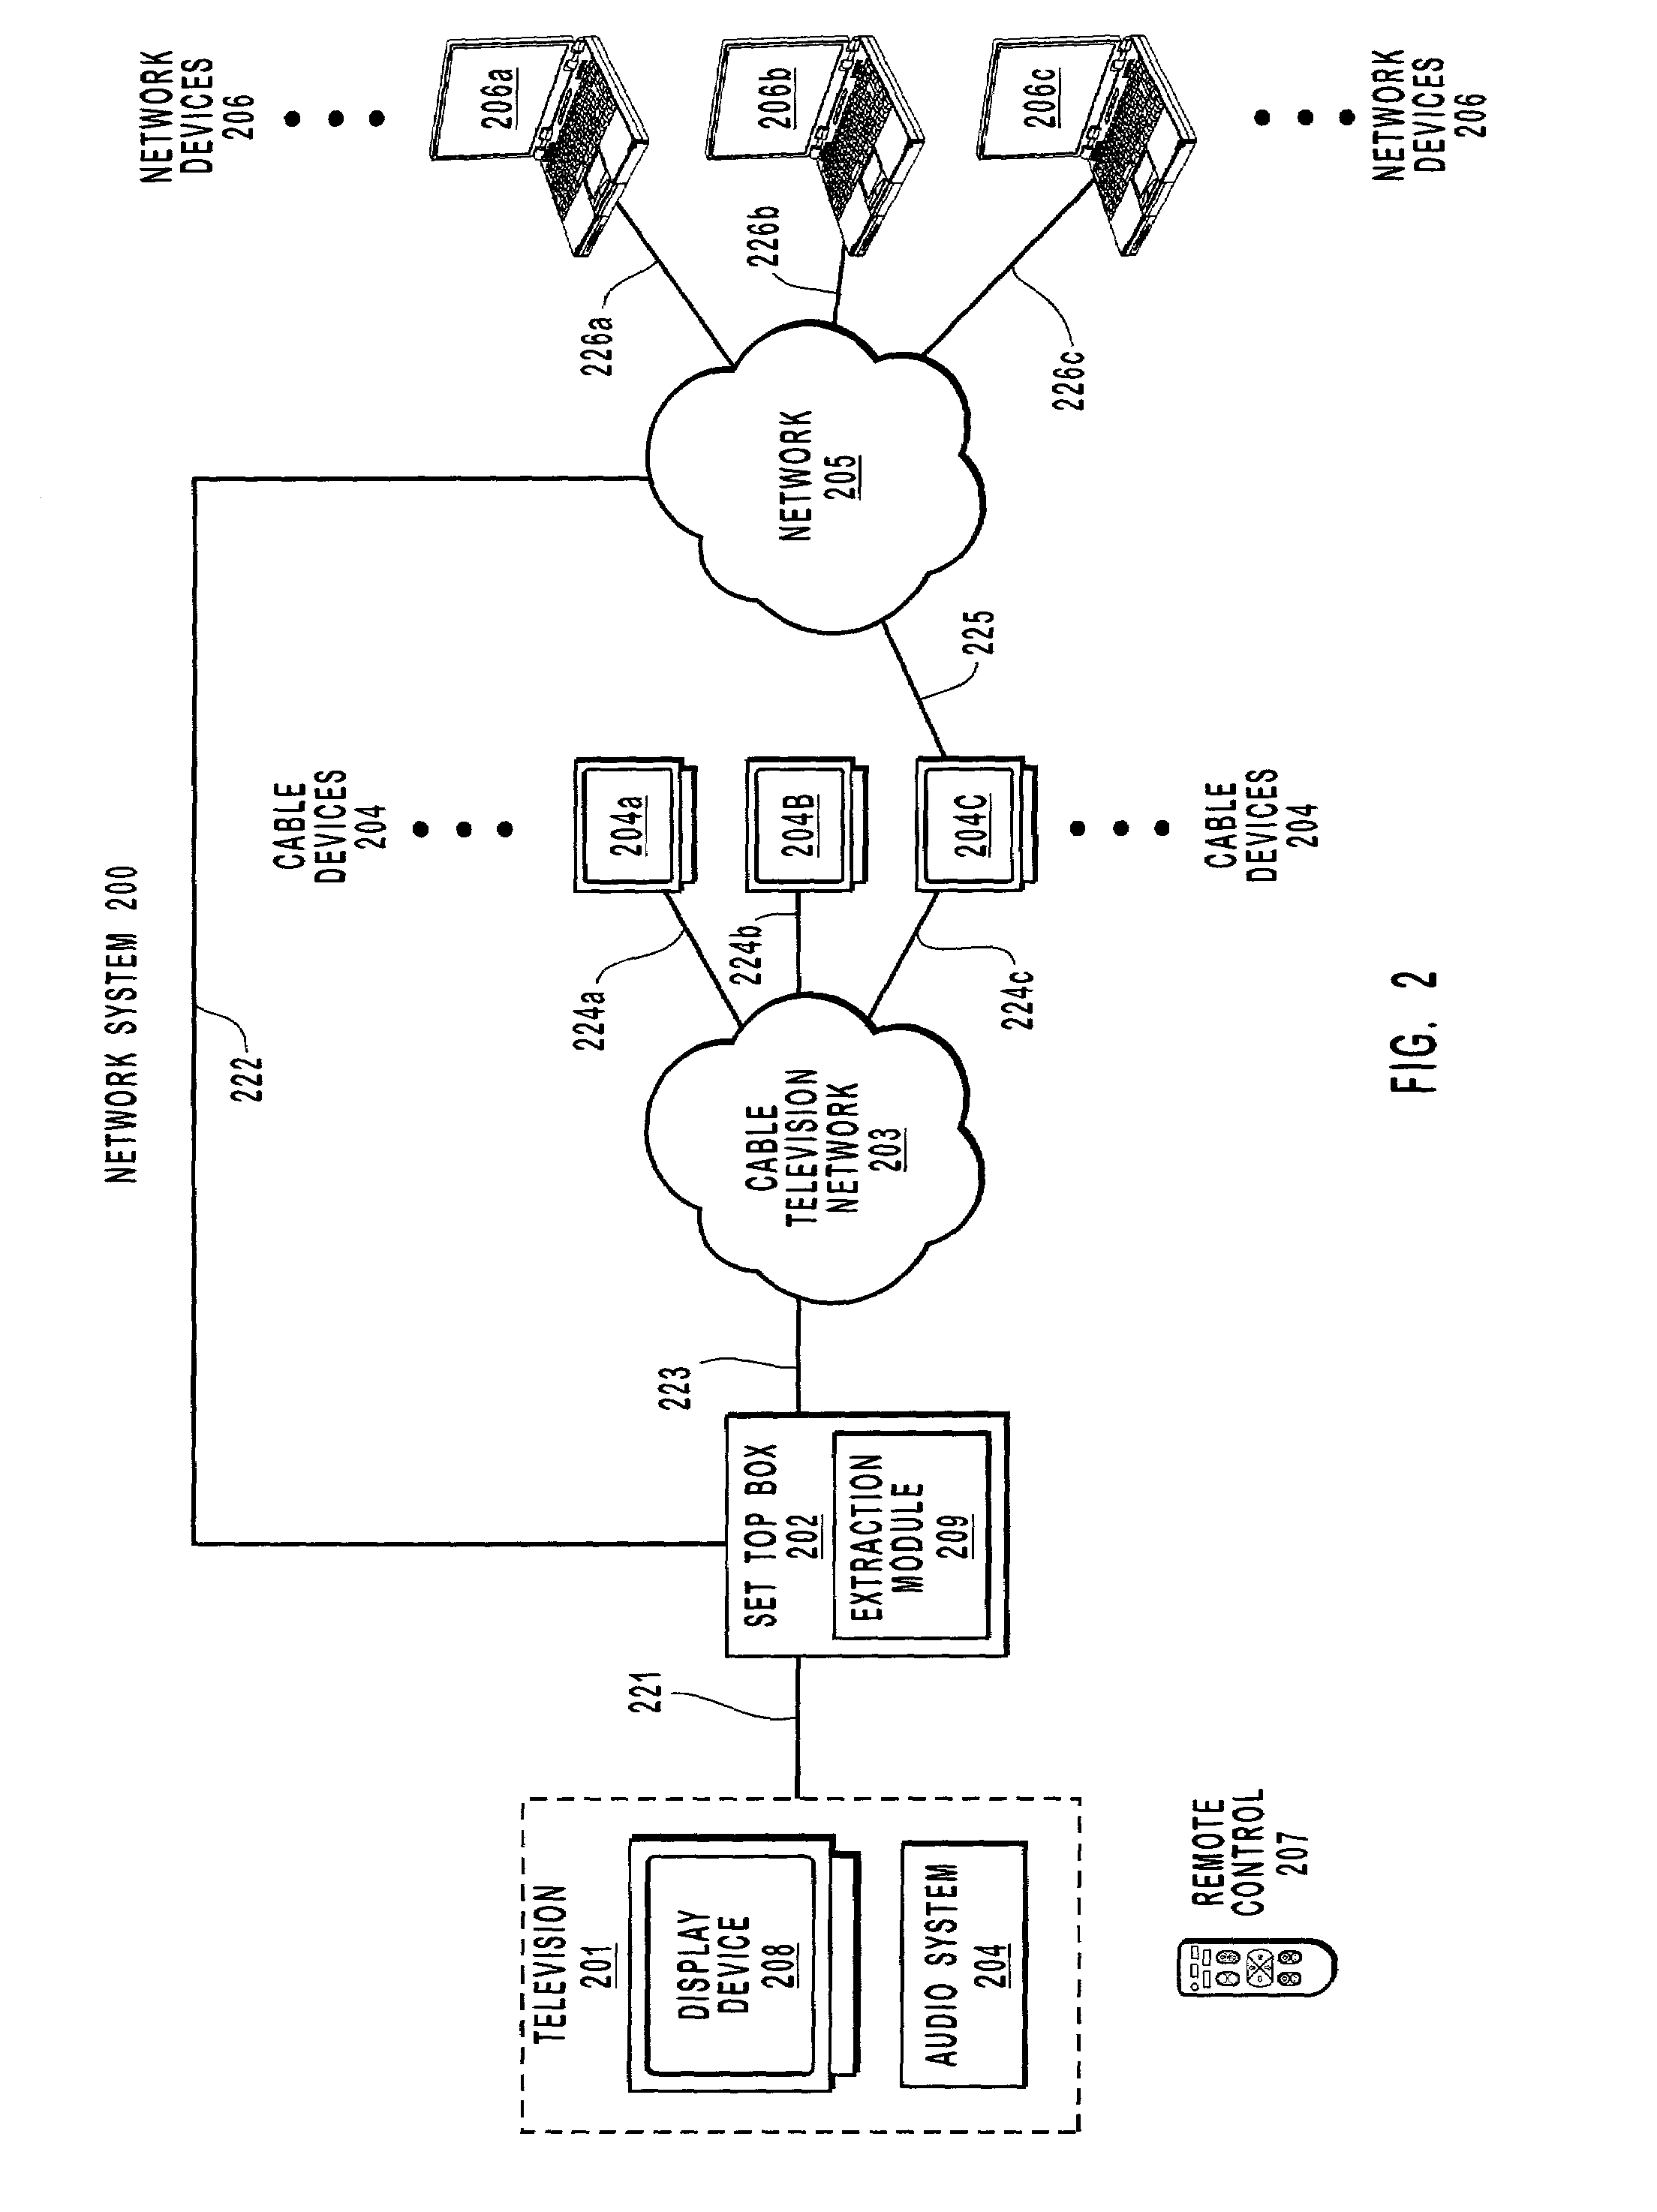 Systems and methods for interfacing with a user in instant messaging